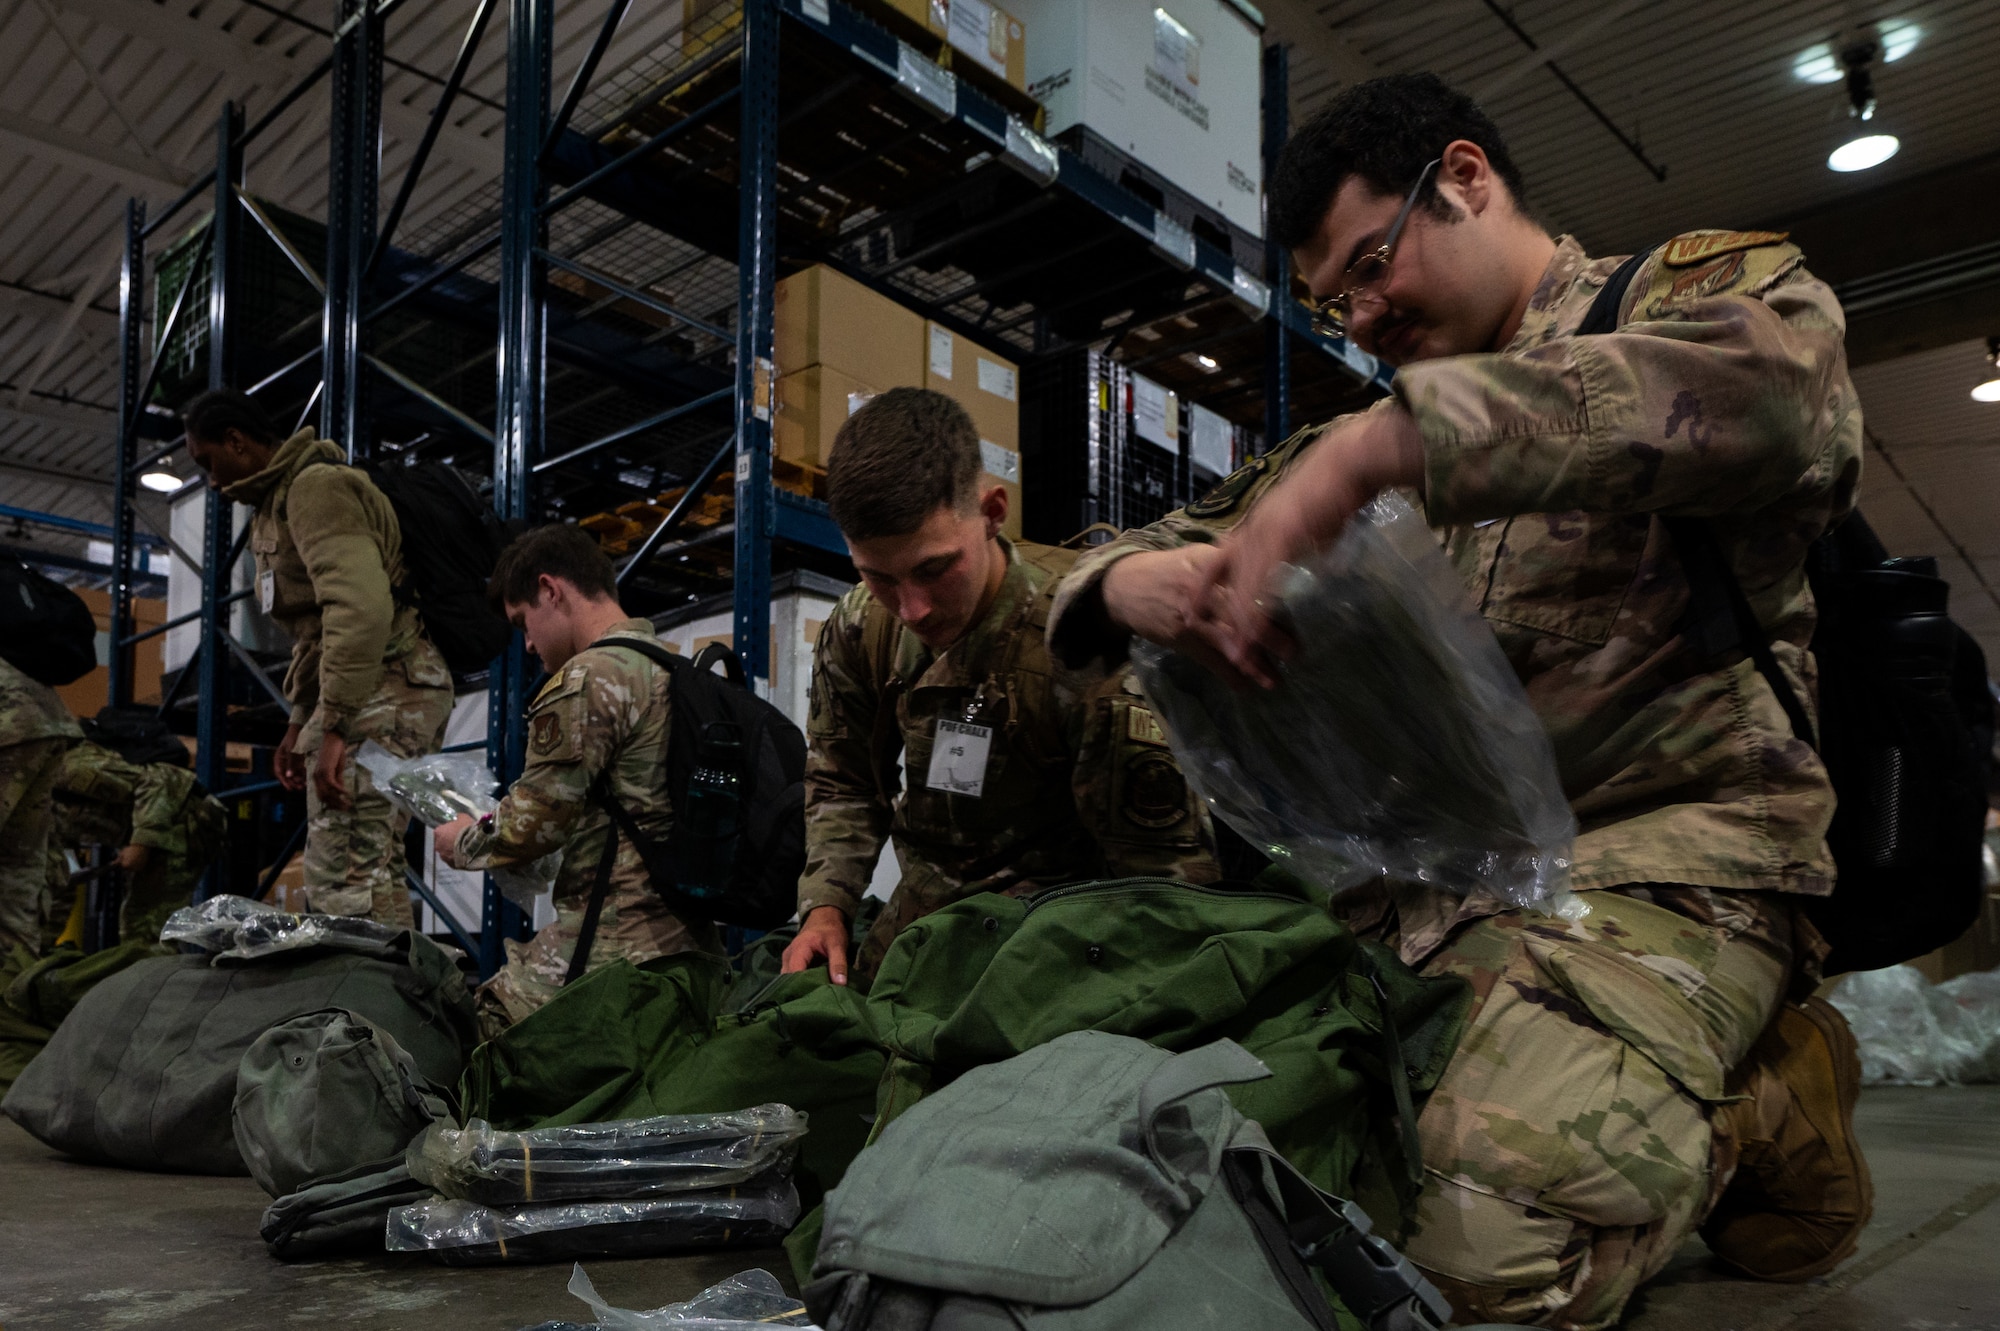 Team Hickam personnel check mobility bags at a pre-deployment function line during Agile Reaper 24-1 on Joint Base Pearl Harbor Hickam, Hawaii, April 4, 2024. Airmen were ensuring that all items in their mobility bags included all parts for their individual protective chemical, biological, radiation, and nuclear gear. (U.S. Air Force photo by Senior Airman Mark Sulaica)